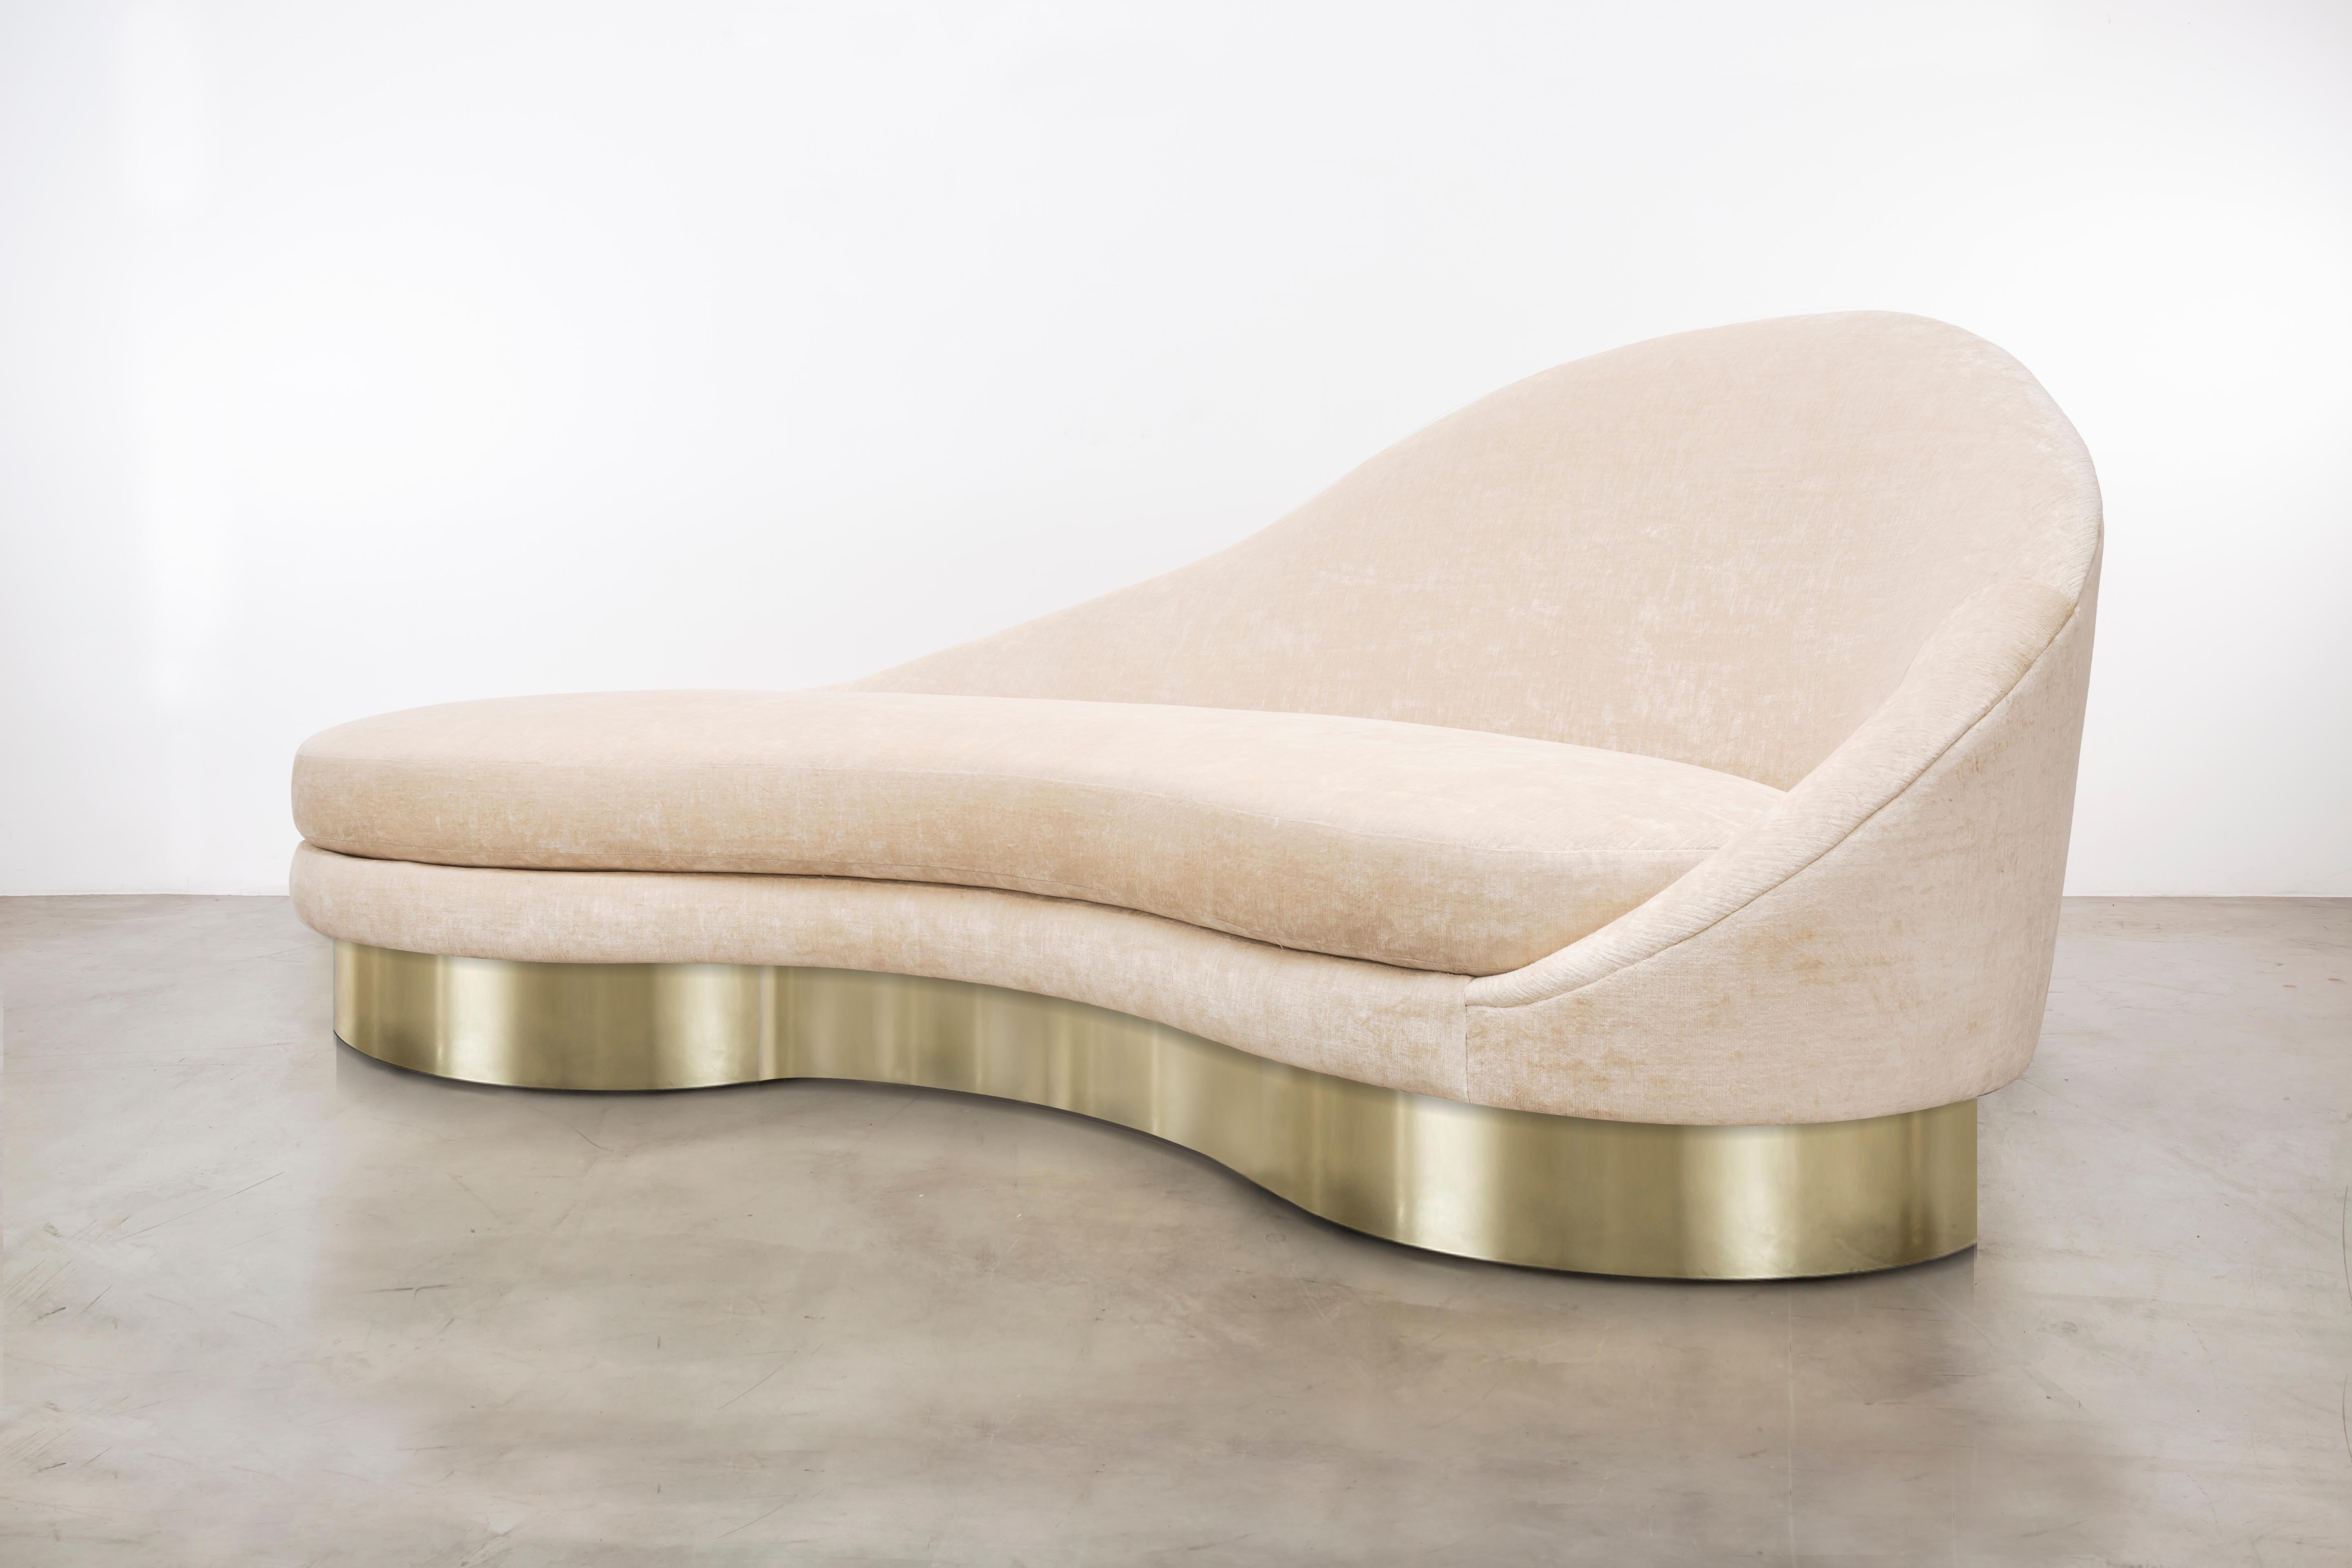 The Satine sofa inspired by the curvature of Gaudi architecture features an asymmetrical sophisticated velvet slope that meets a metal plinth base to make a minimal and elegant statement. Fully custom and made to order in California. As shown in